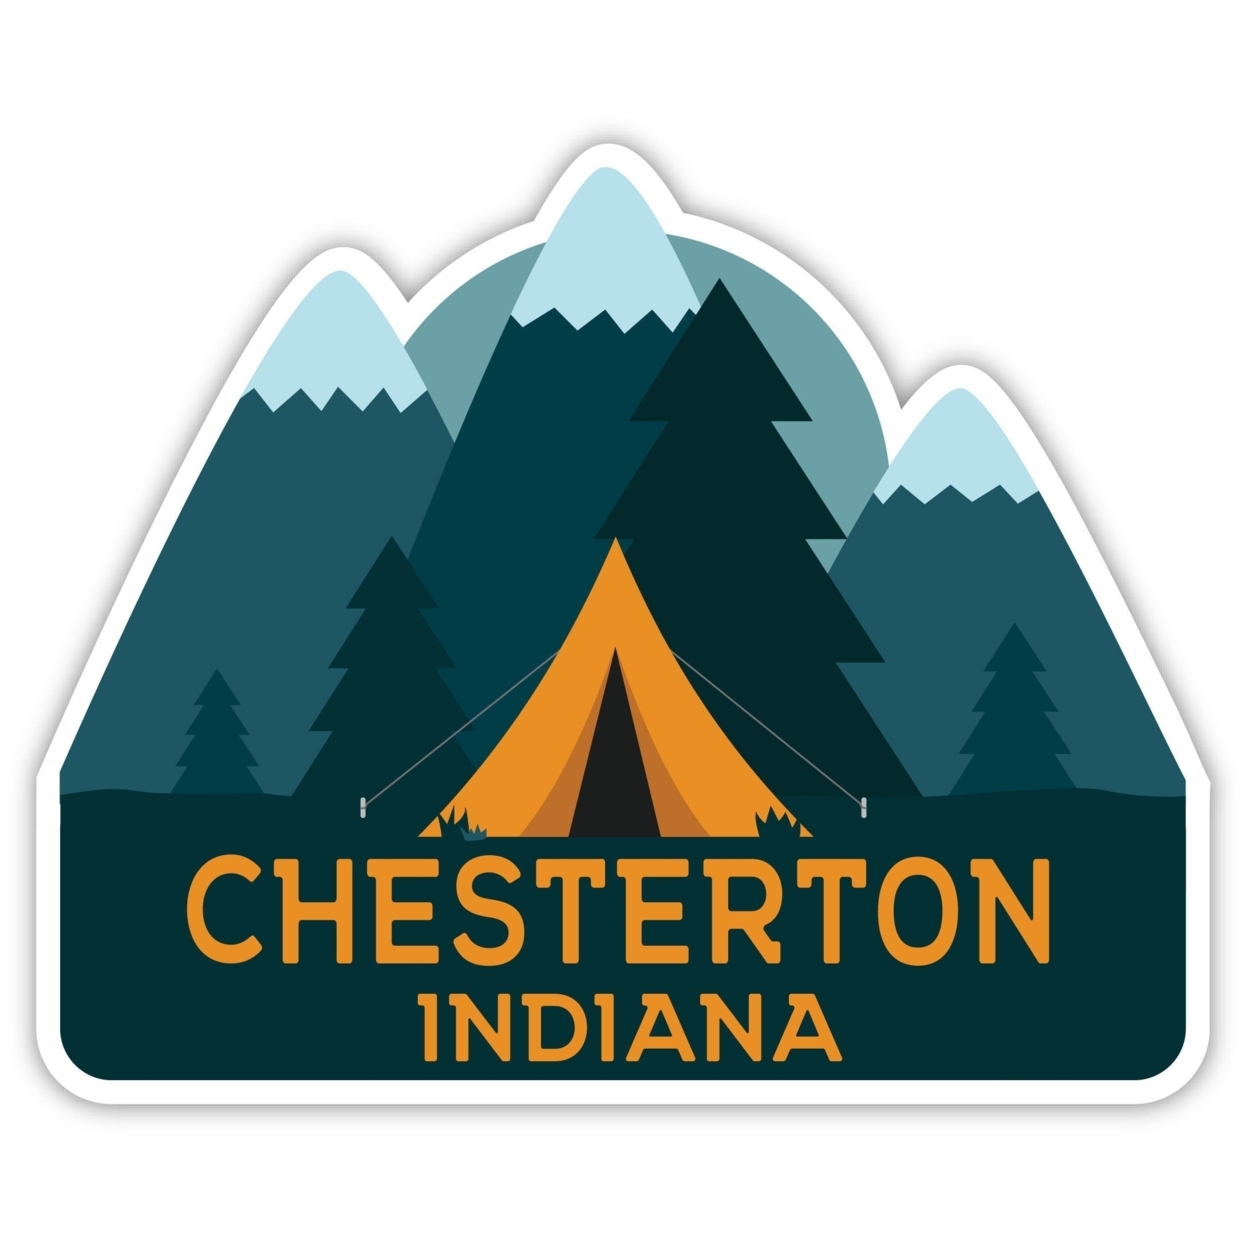 Chesterton Indiana Souvenir Decorative Stickers (Choose Theme And Size) - 4-Pack, 10-Inch, Tent